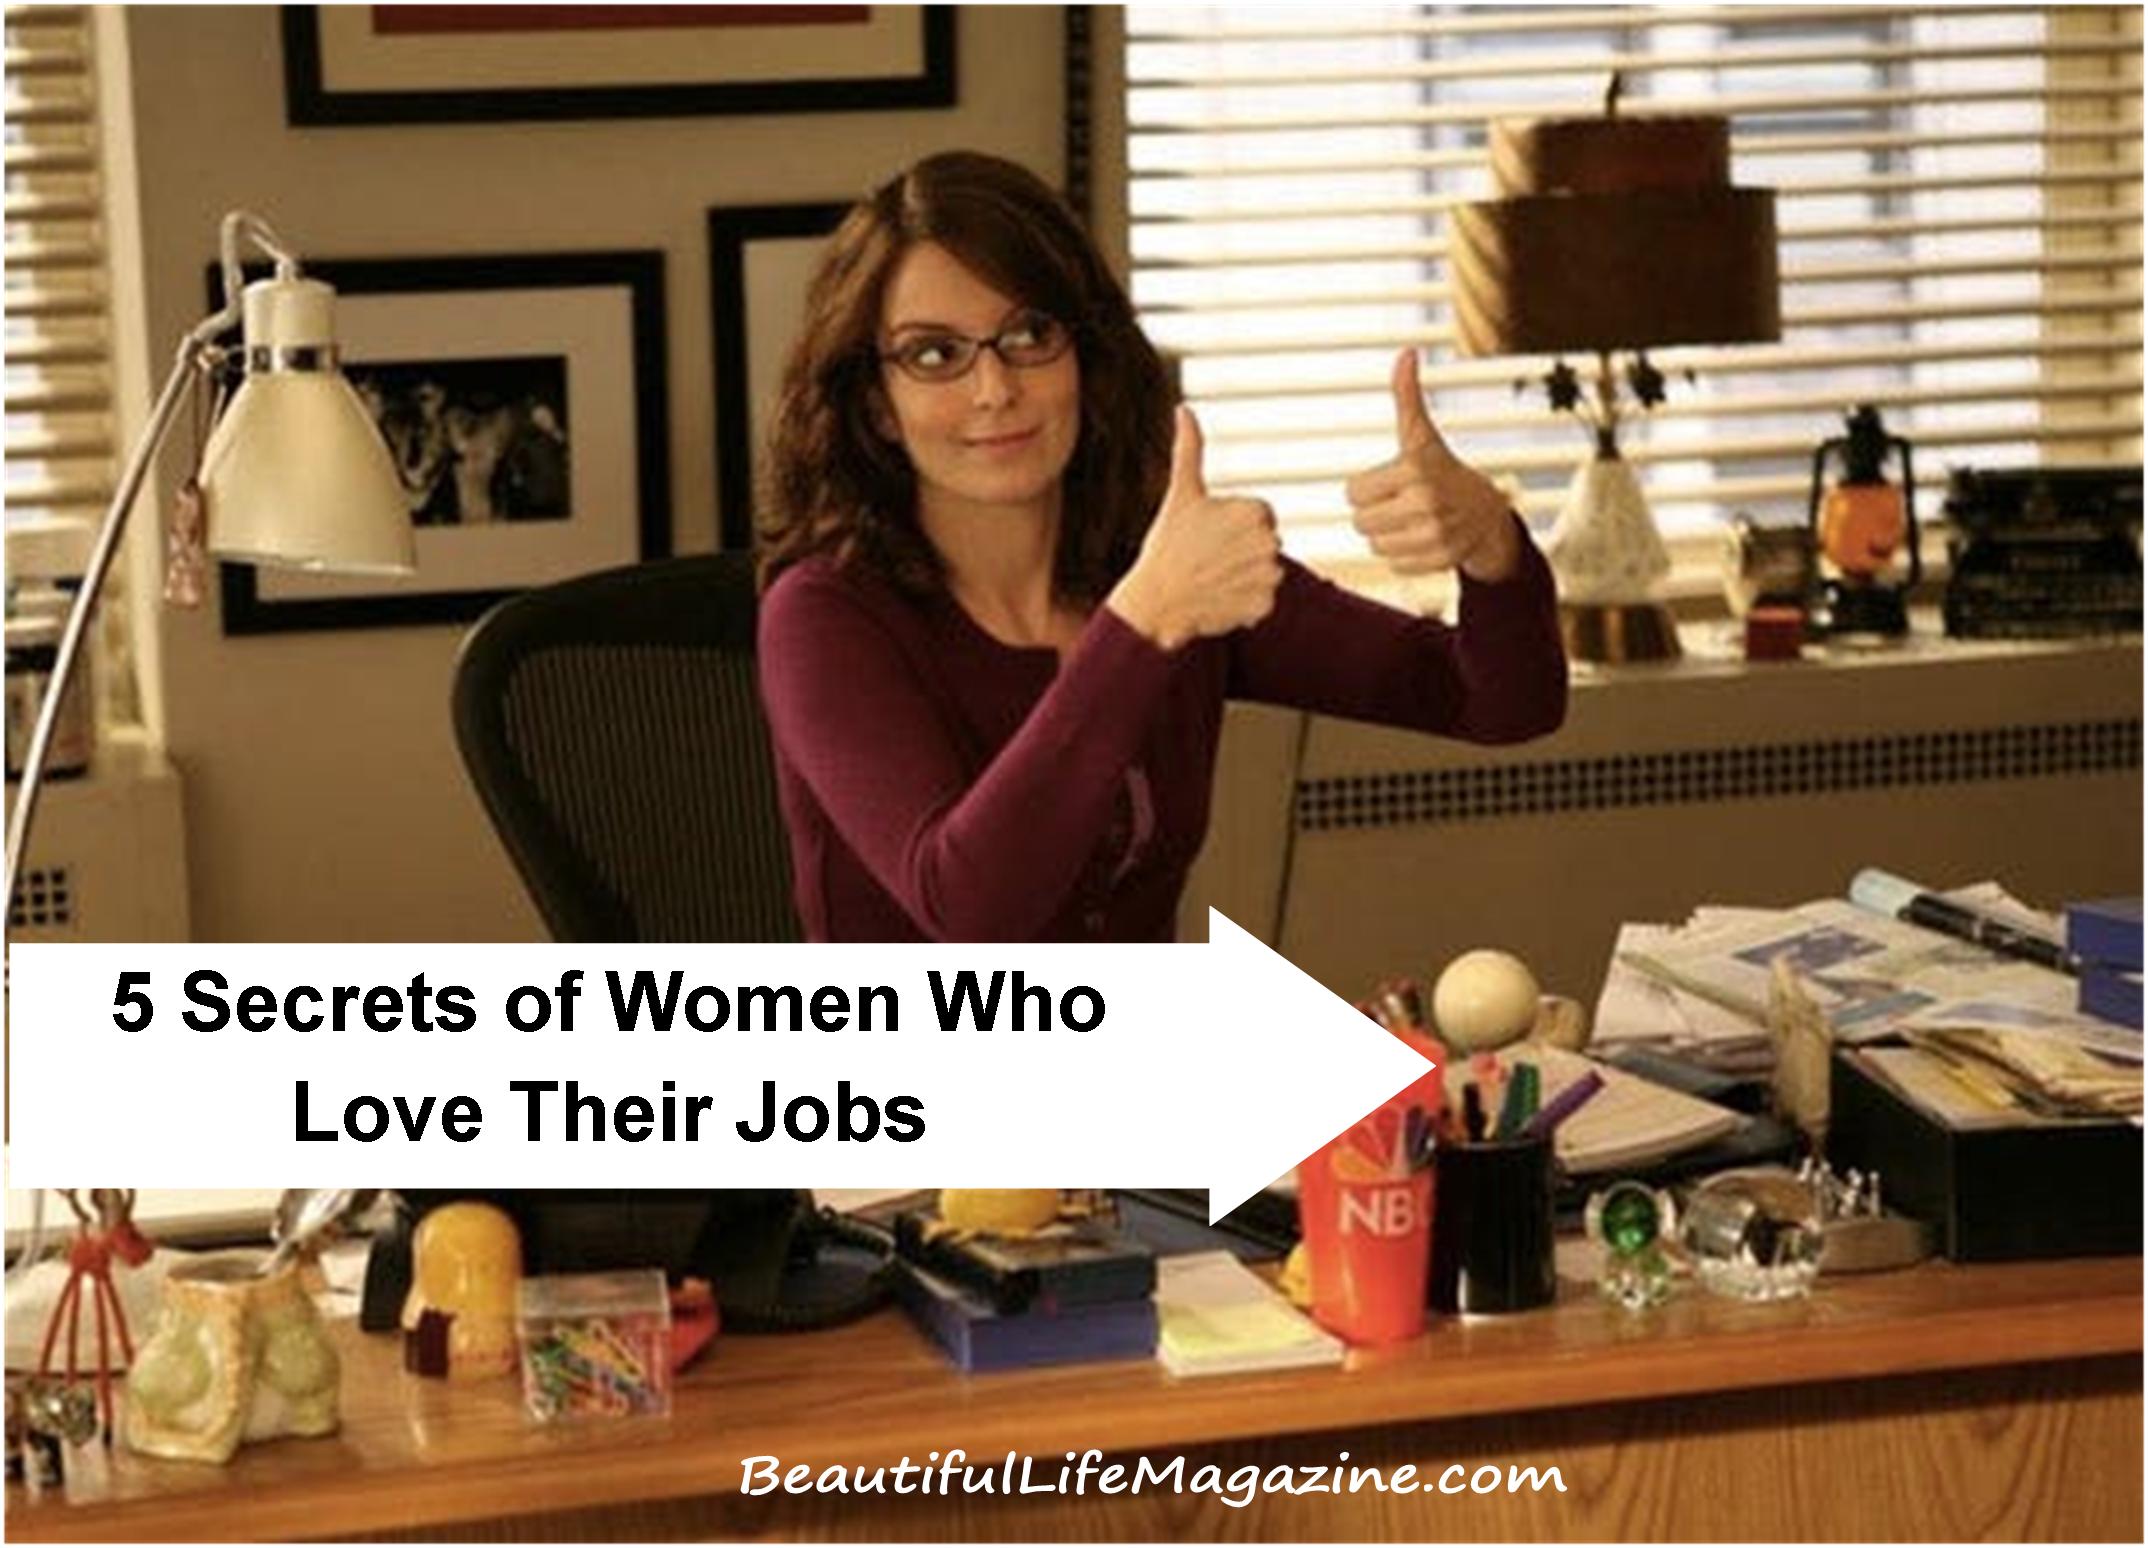 Four years in the same law firm, she’s as psyched to be there as the day she first walked in. Here's 5 secrets of women who really love their jobs.